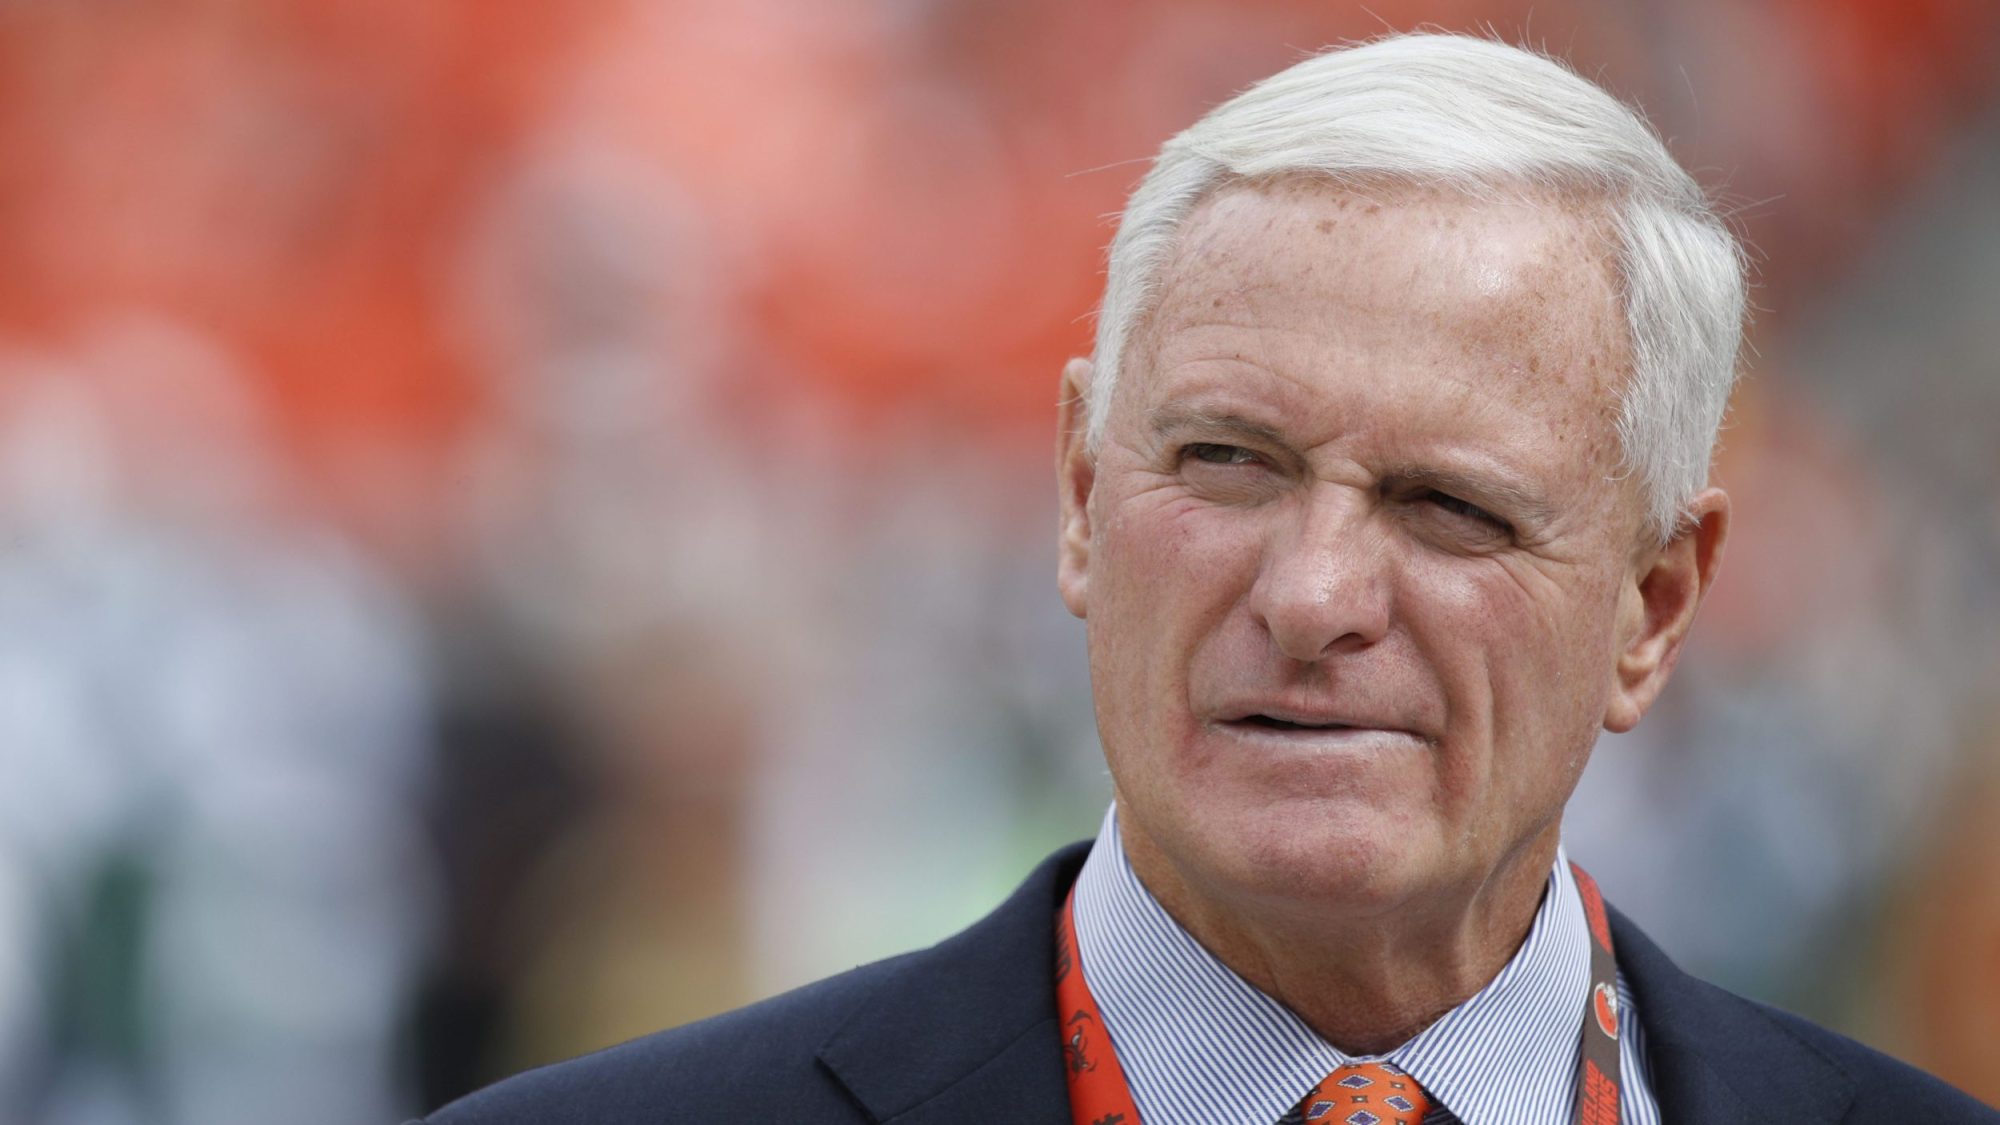 Cleveland Browns owner Jimmy Haslam is seen before the game against the New York Jets at FirstEnergy Stadium on October 8, 2017 in Cleveland, Ohio. He is wearing a suit, a Browns laniard, and has a confused look on his face.